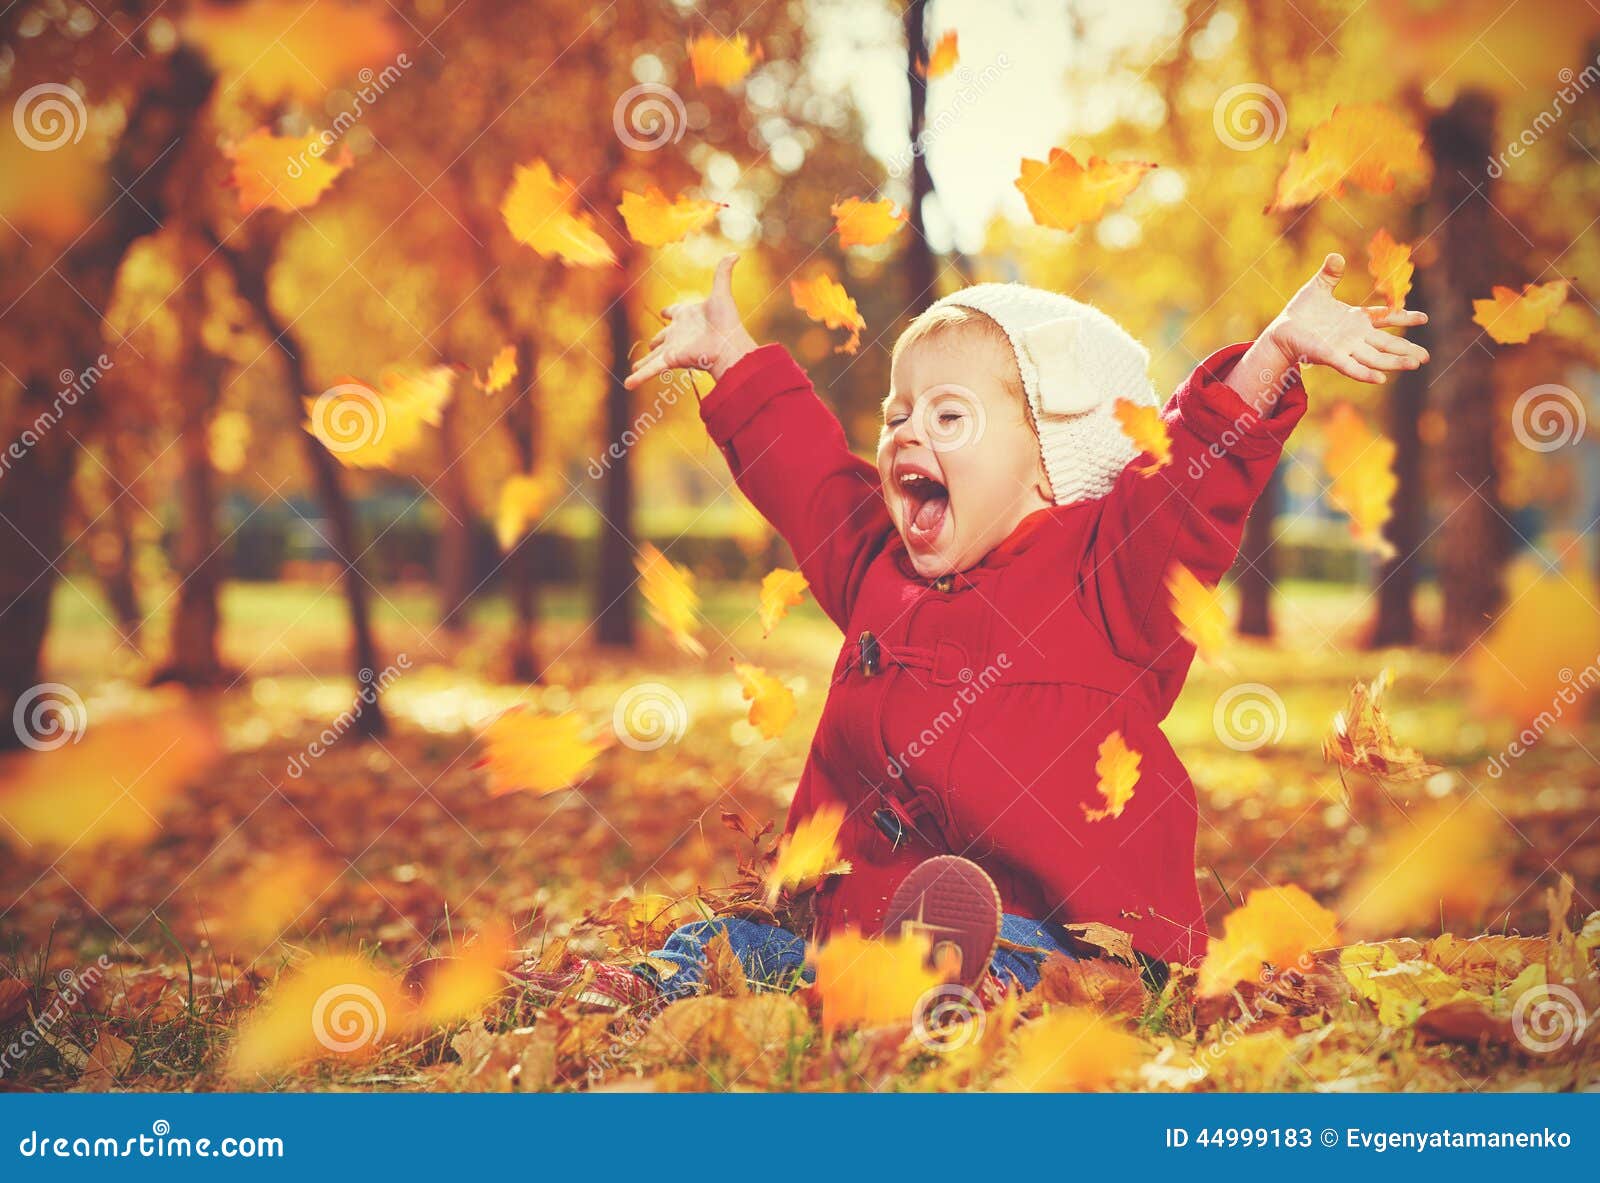 happy little child, baby girl laughing and playing in autumn